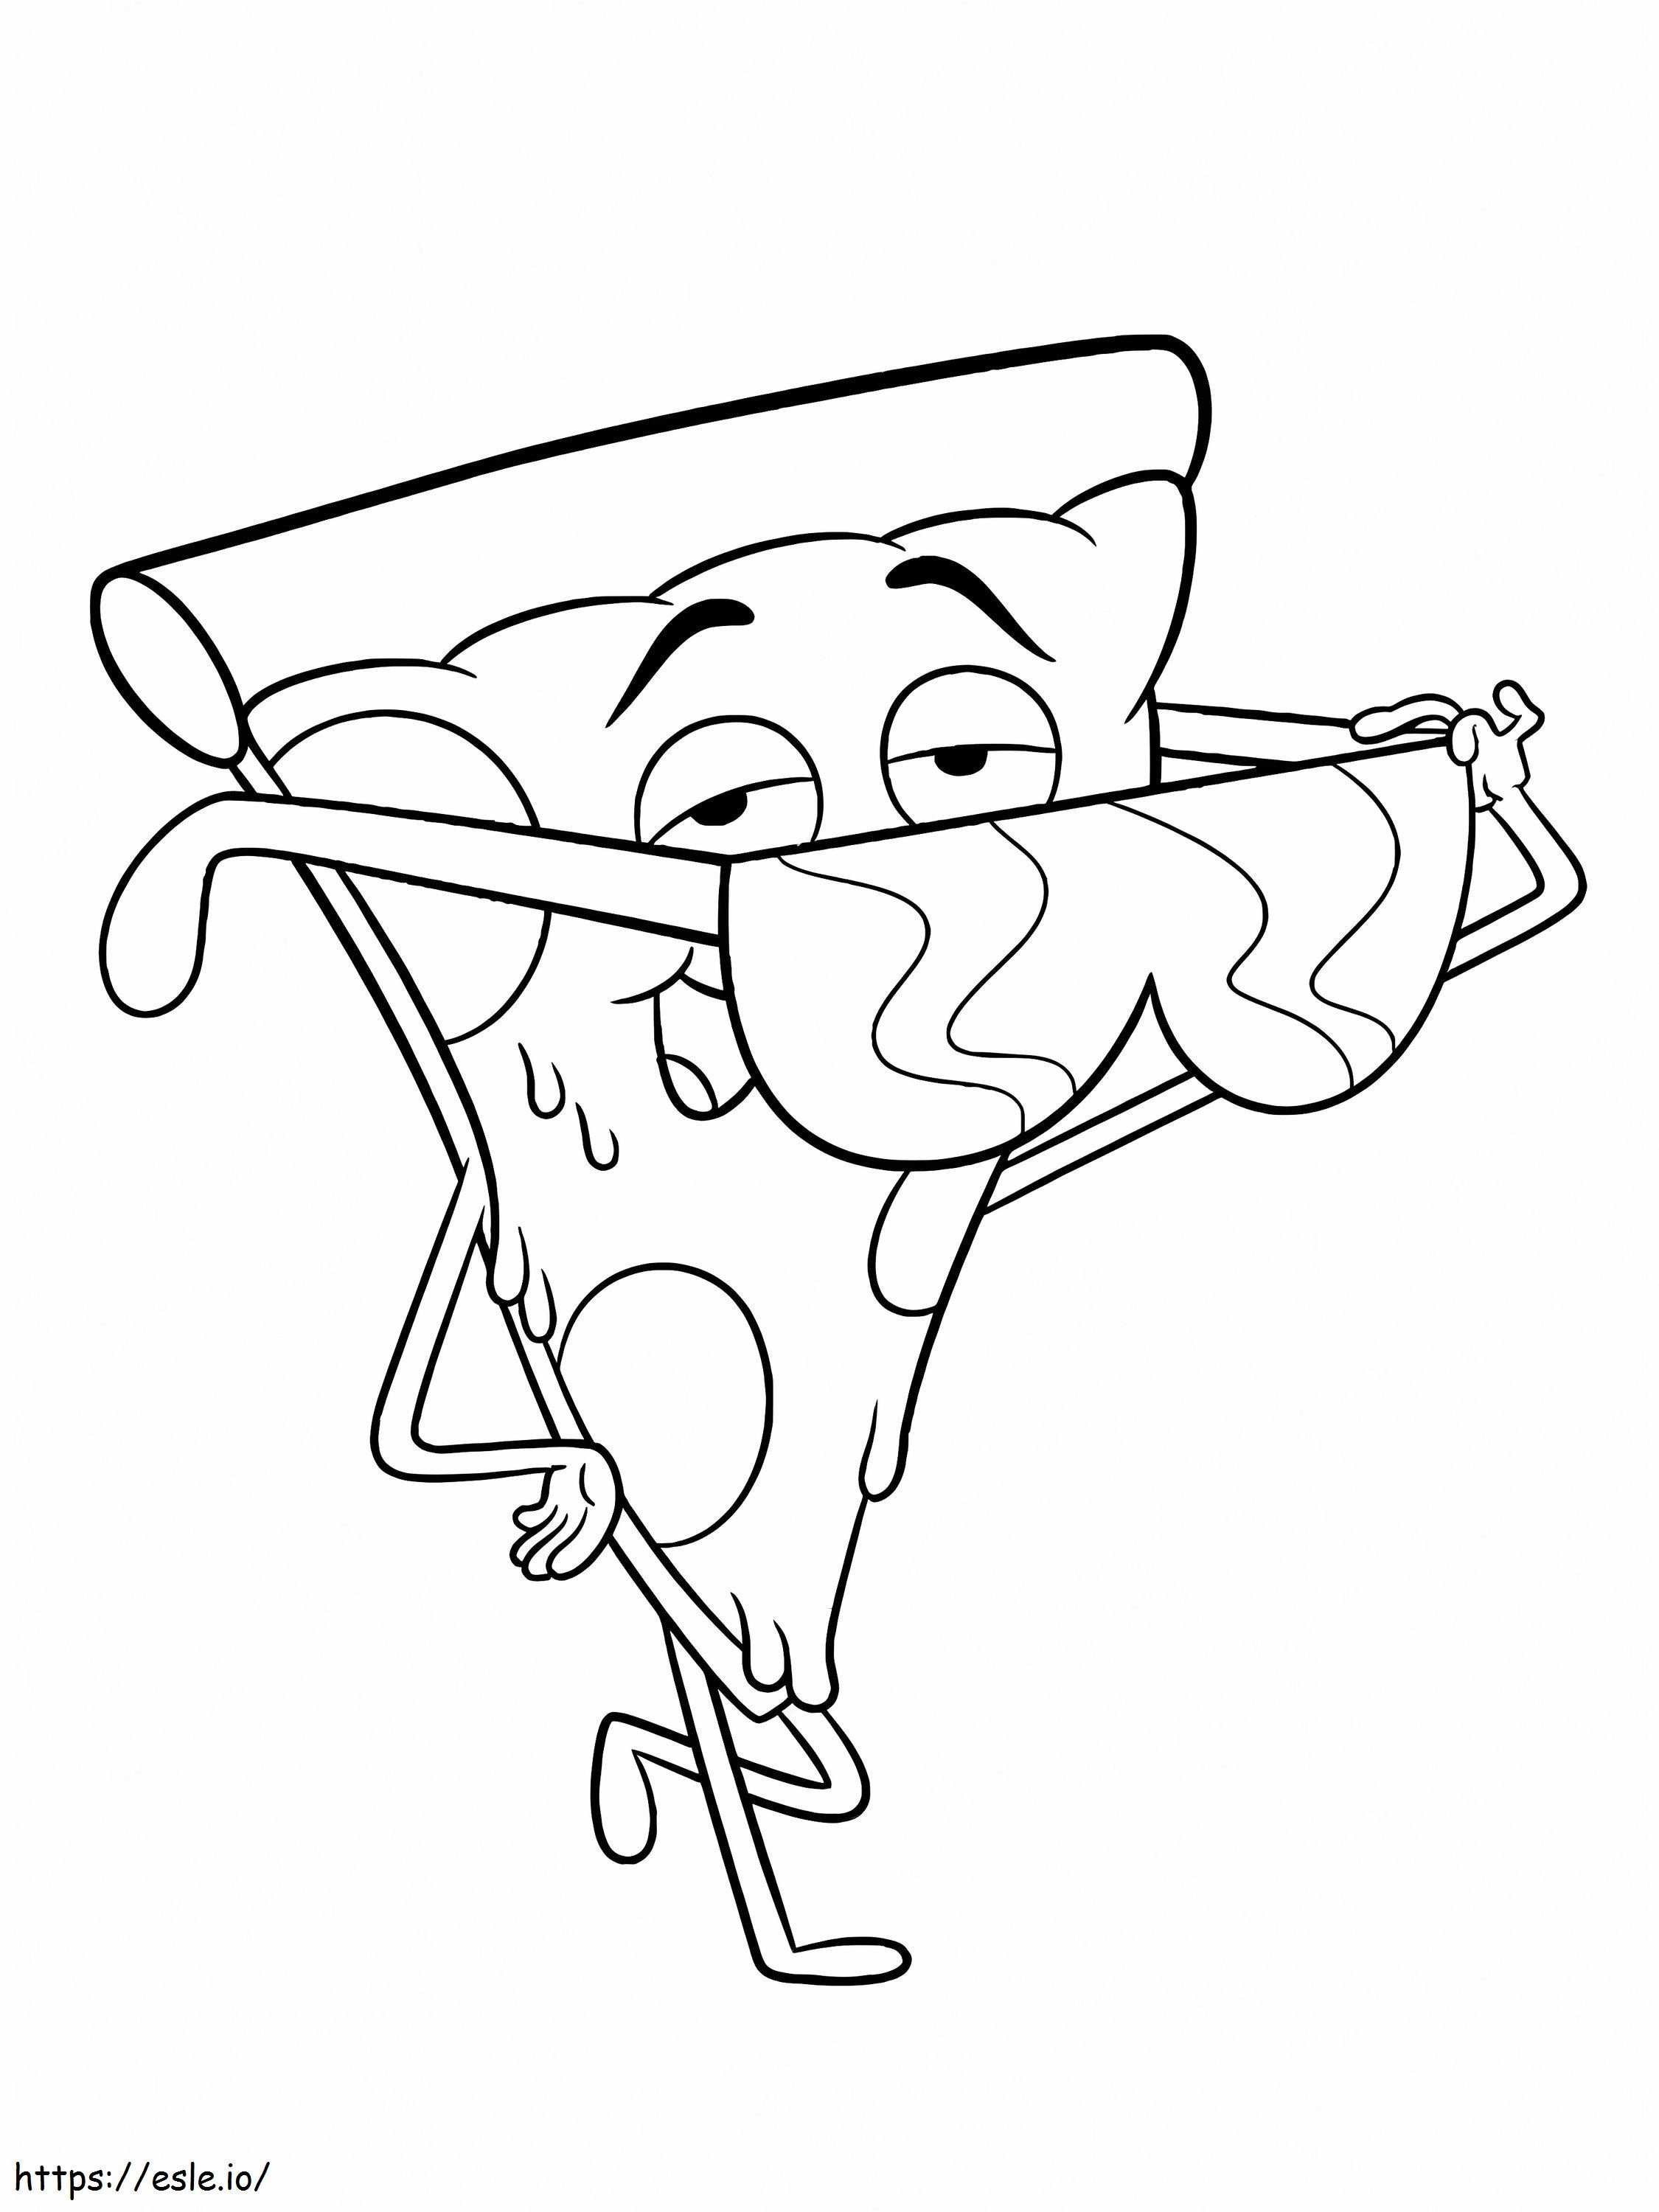 Pizza Steve coloring page